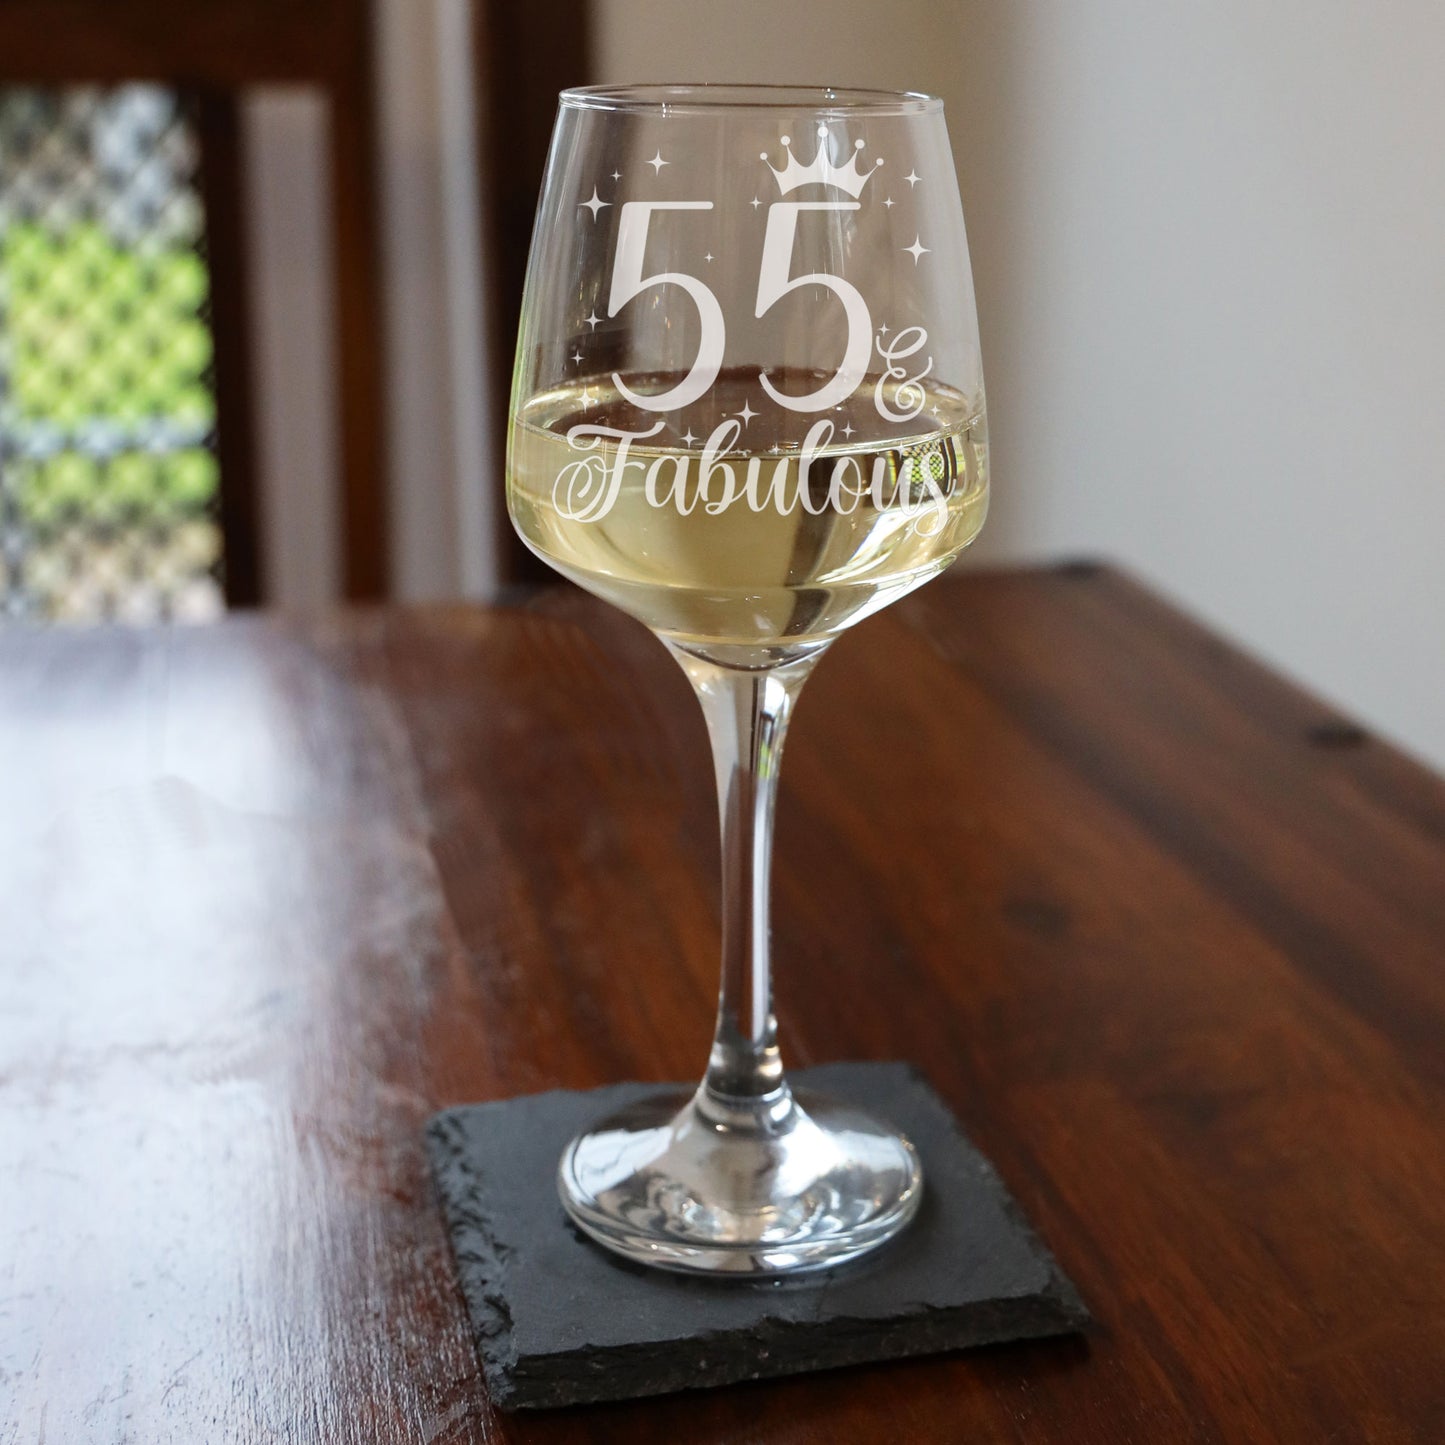 55 & Fabulous 55th Birthday Gift Engraved Wine Glass and/or Coaster Set  - Always Looking Good - Wine Glass Only  